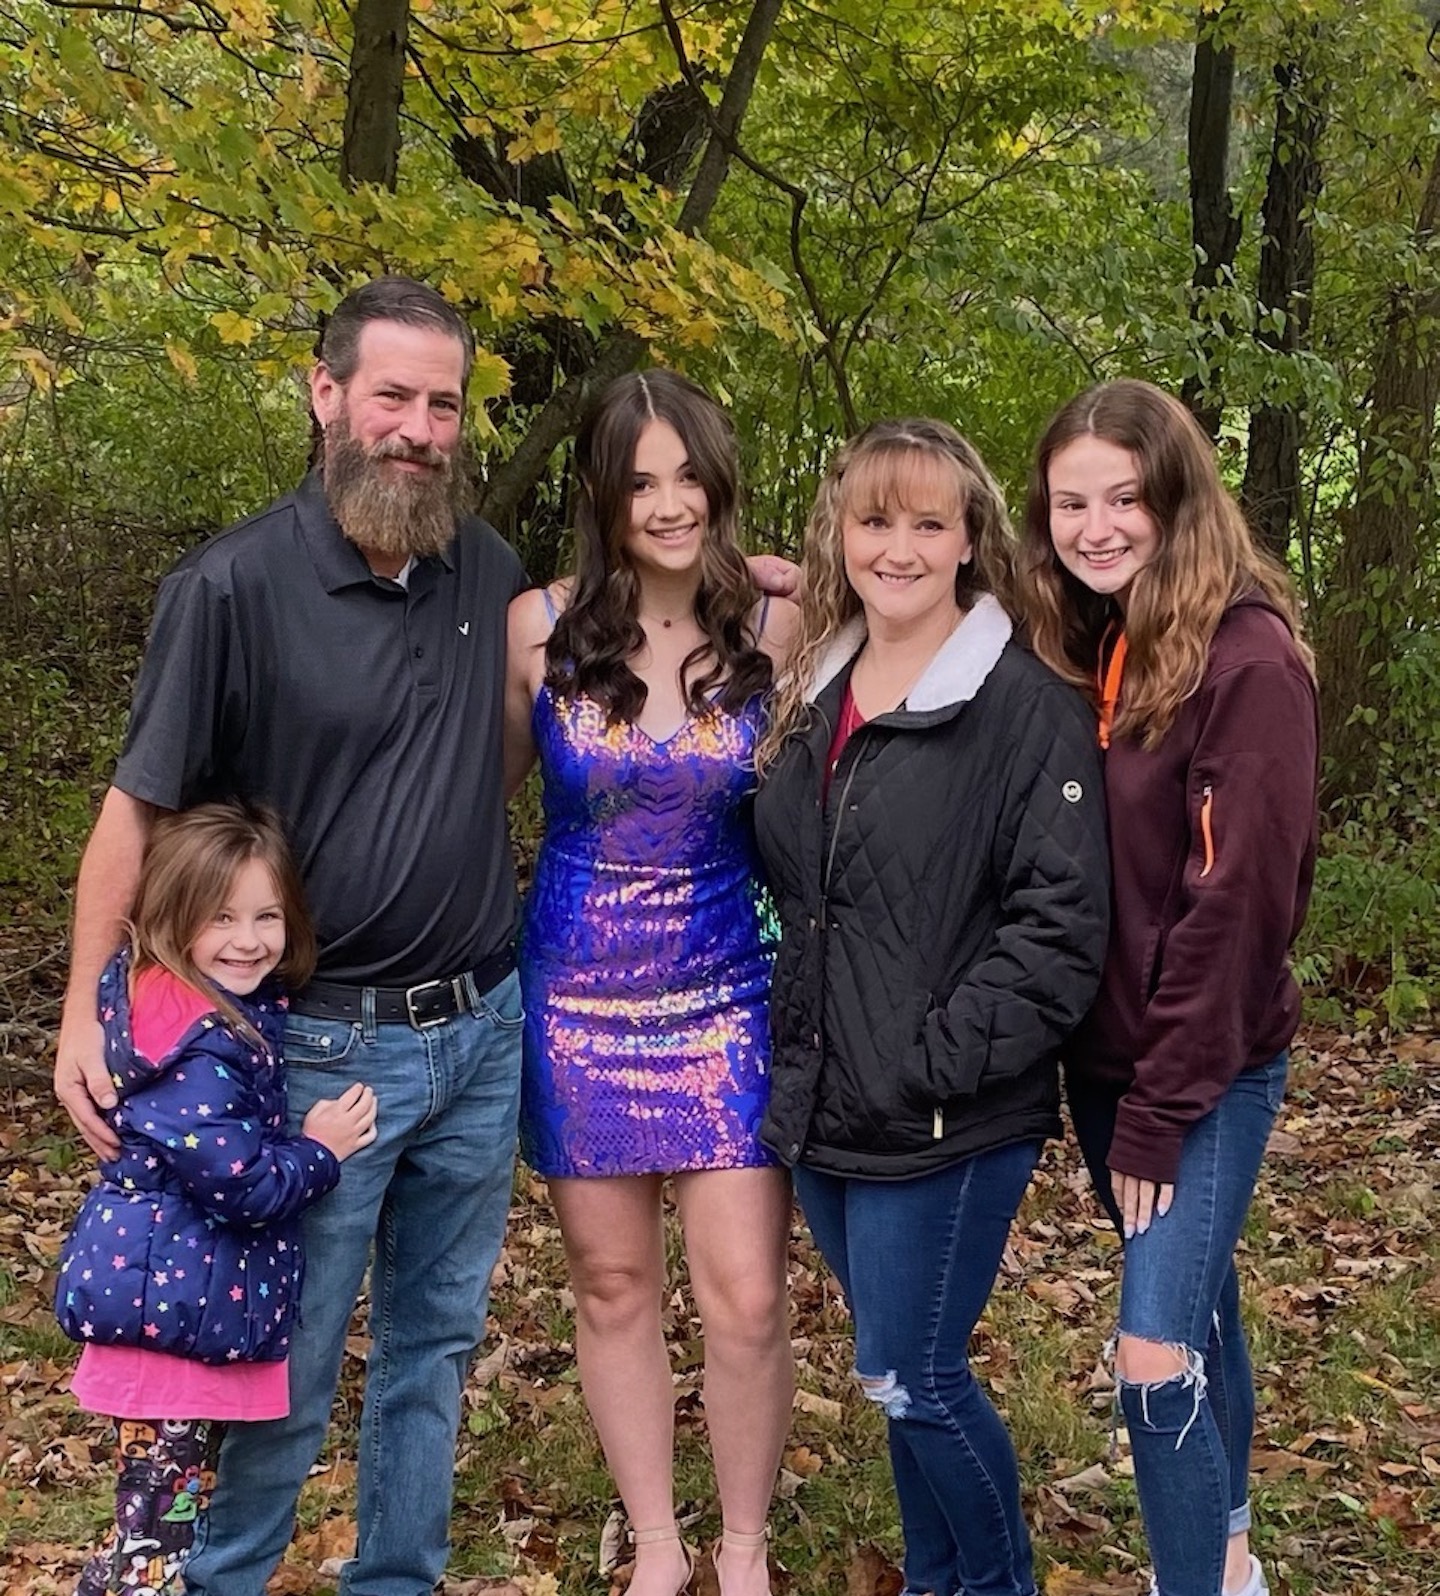 Chris Albright (second to left) and Jessica Albright (second to right) pose for a family photo with their children in East Palestine, Ohio, in October 2021. Photo courtesy of Chris Albright.